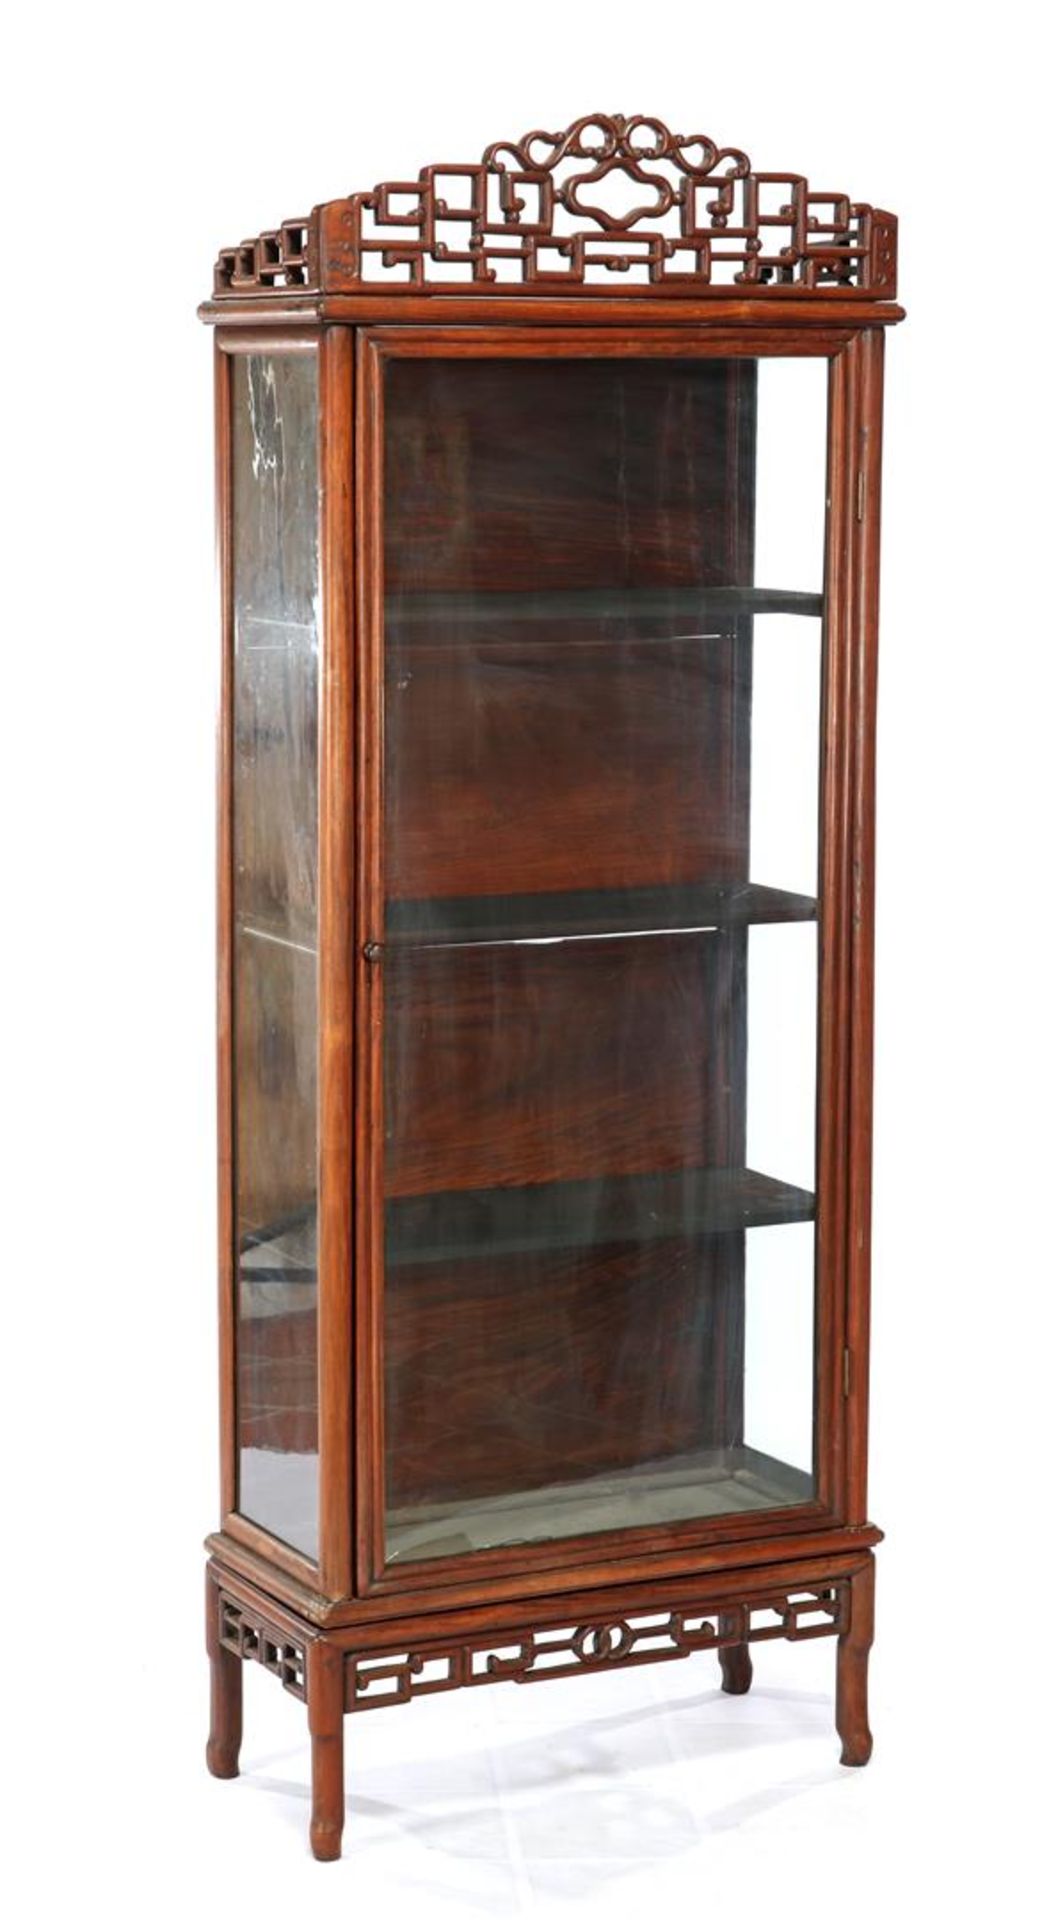 Rosewood Chinese 1-door display cabinet with glass in door and sides, with bumped & nbsp; crest,